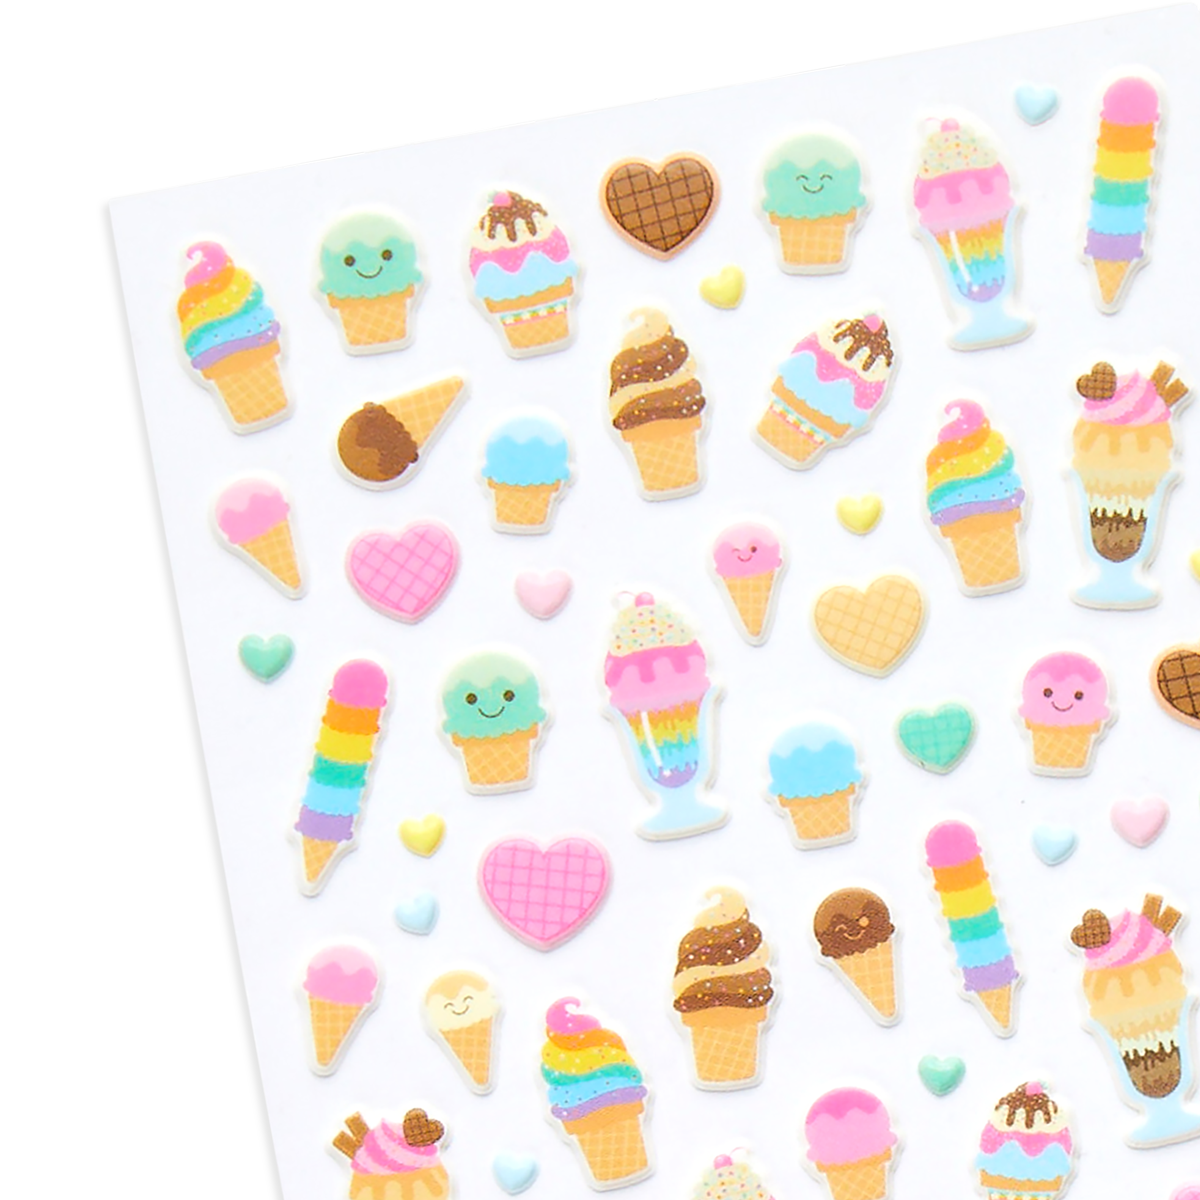 Sandylion Ice Cream and Sweets Sparkly Stickers 1 Sheet of 21 Different  Stickers 